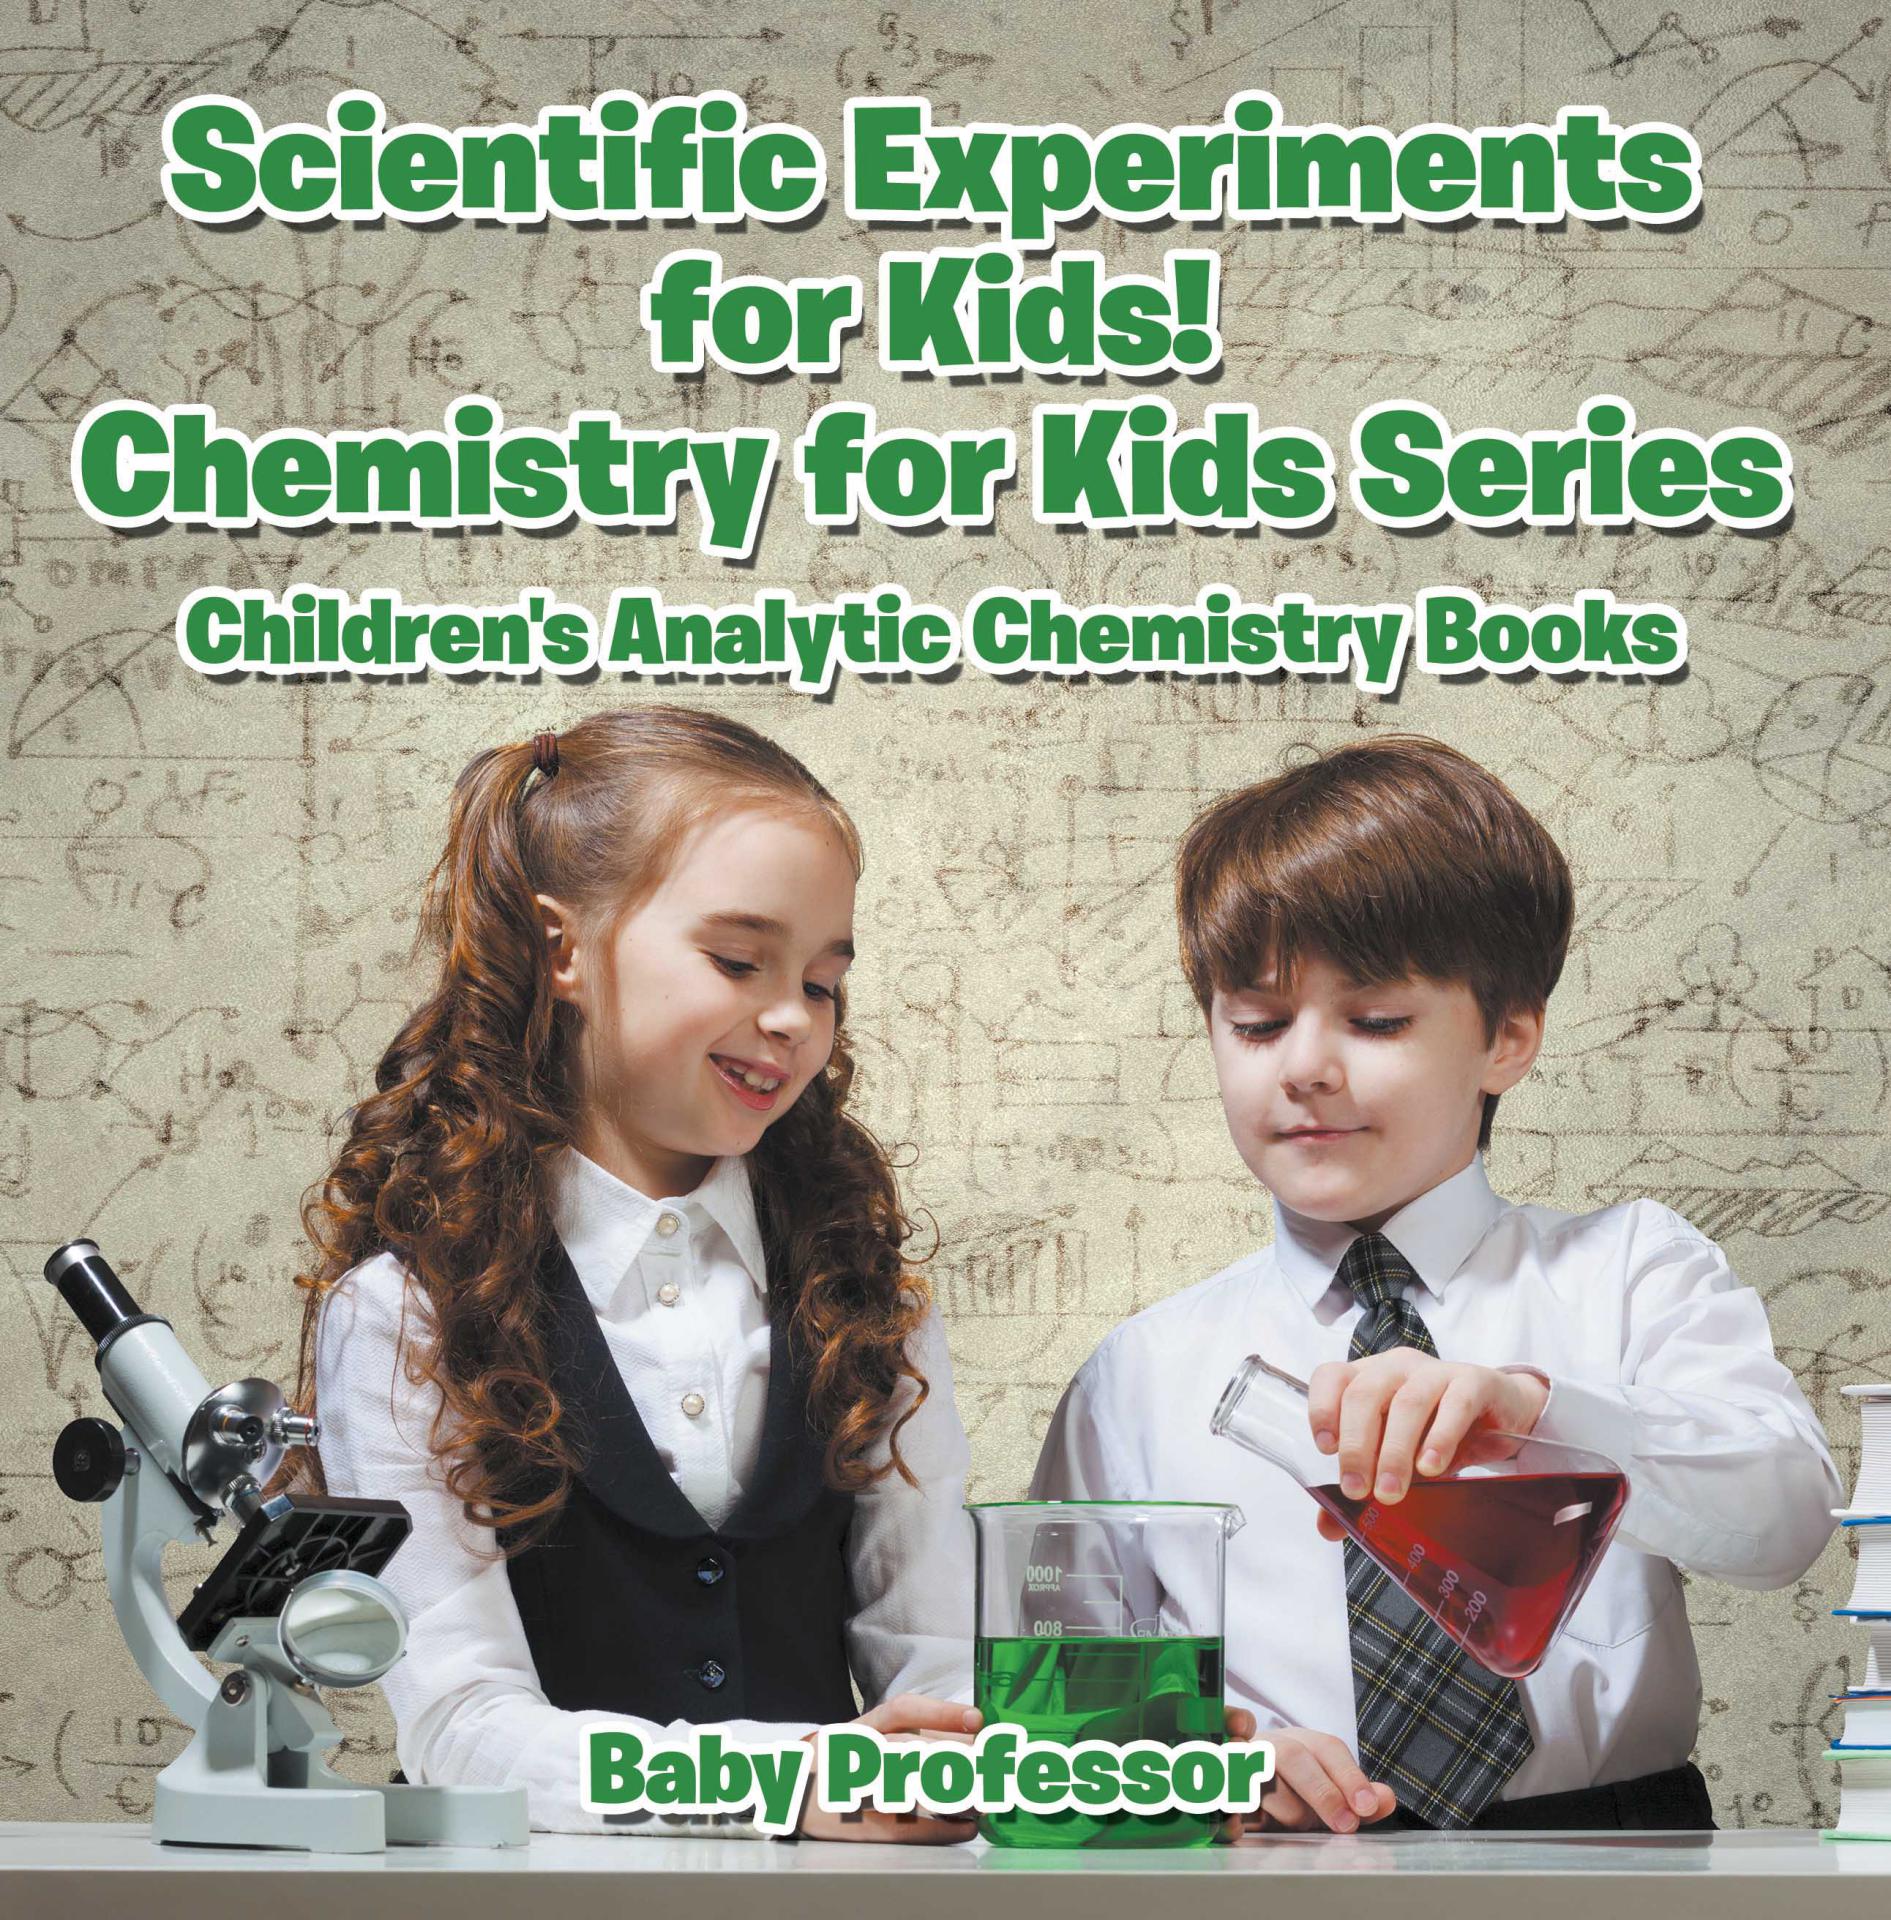 Scientific Experiments for Kids! Chemistry for Kids Series - Children's Analytic Chemistry Books by Baby Professor